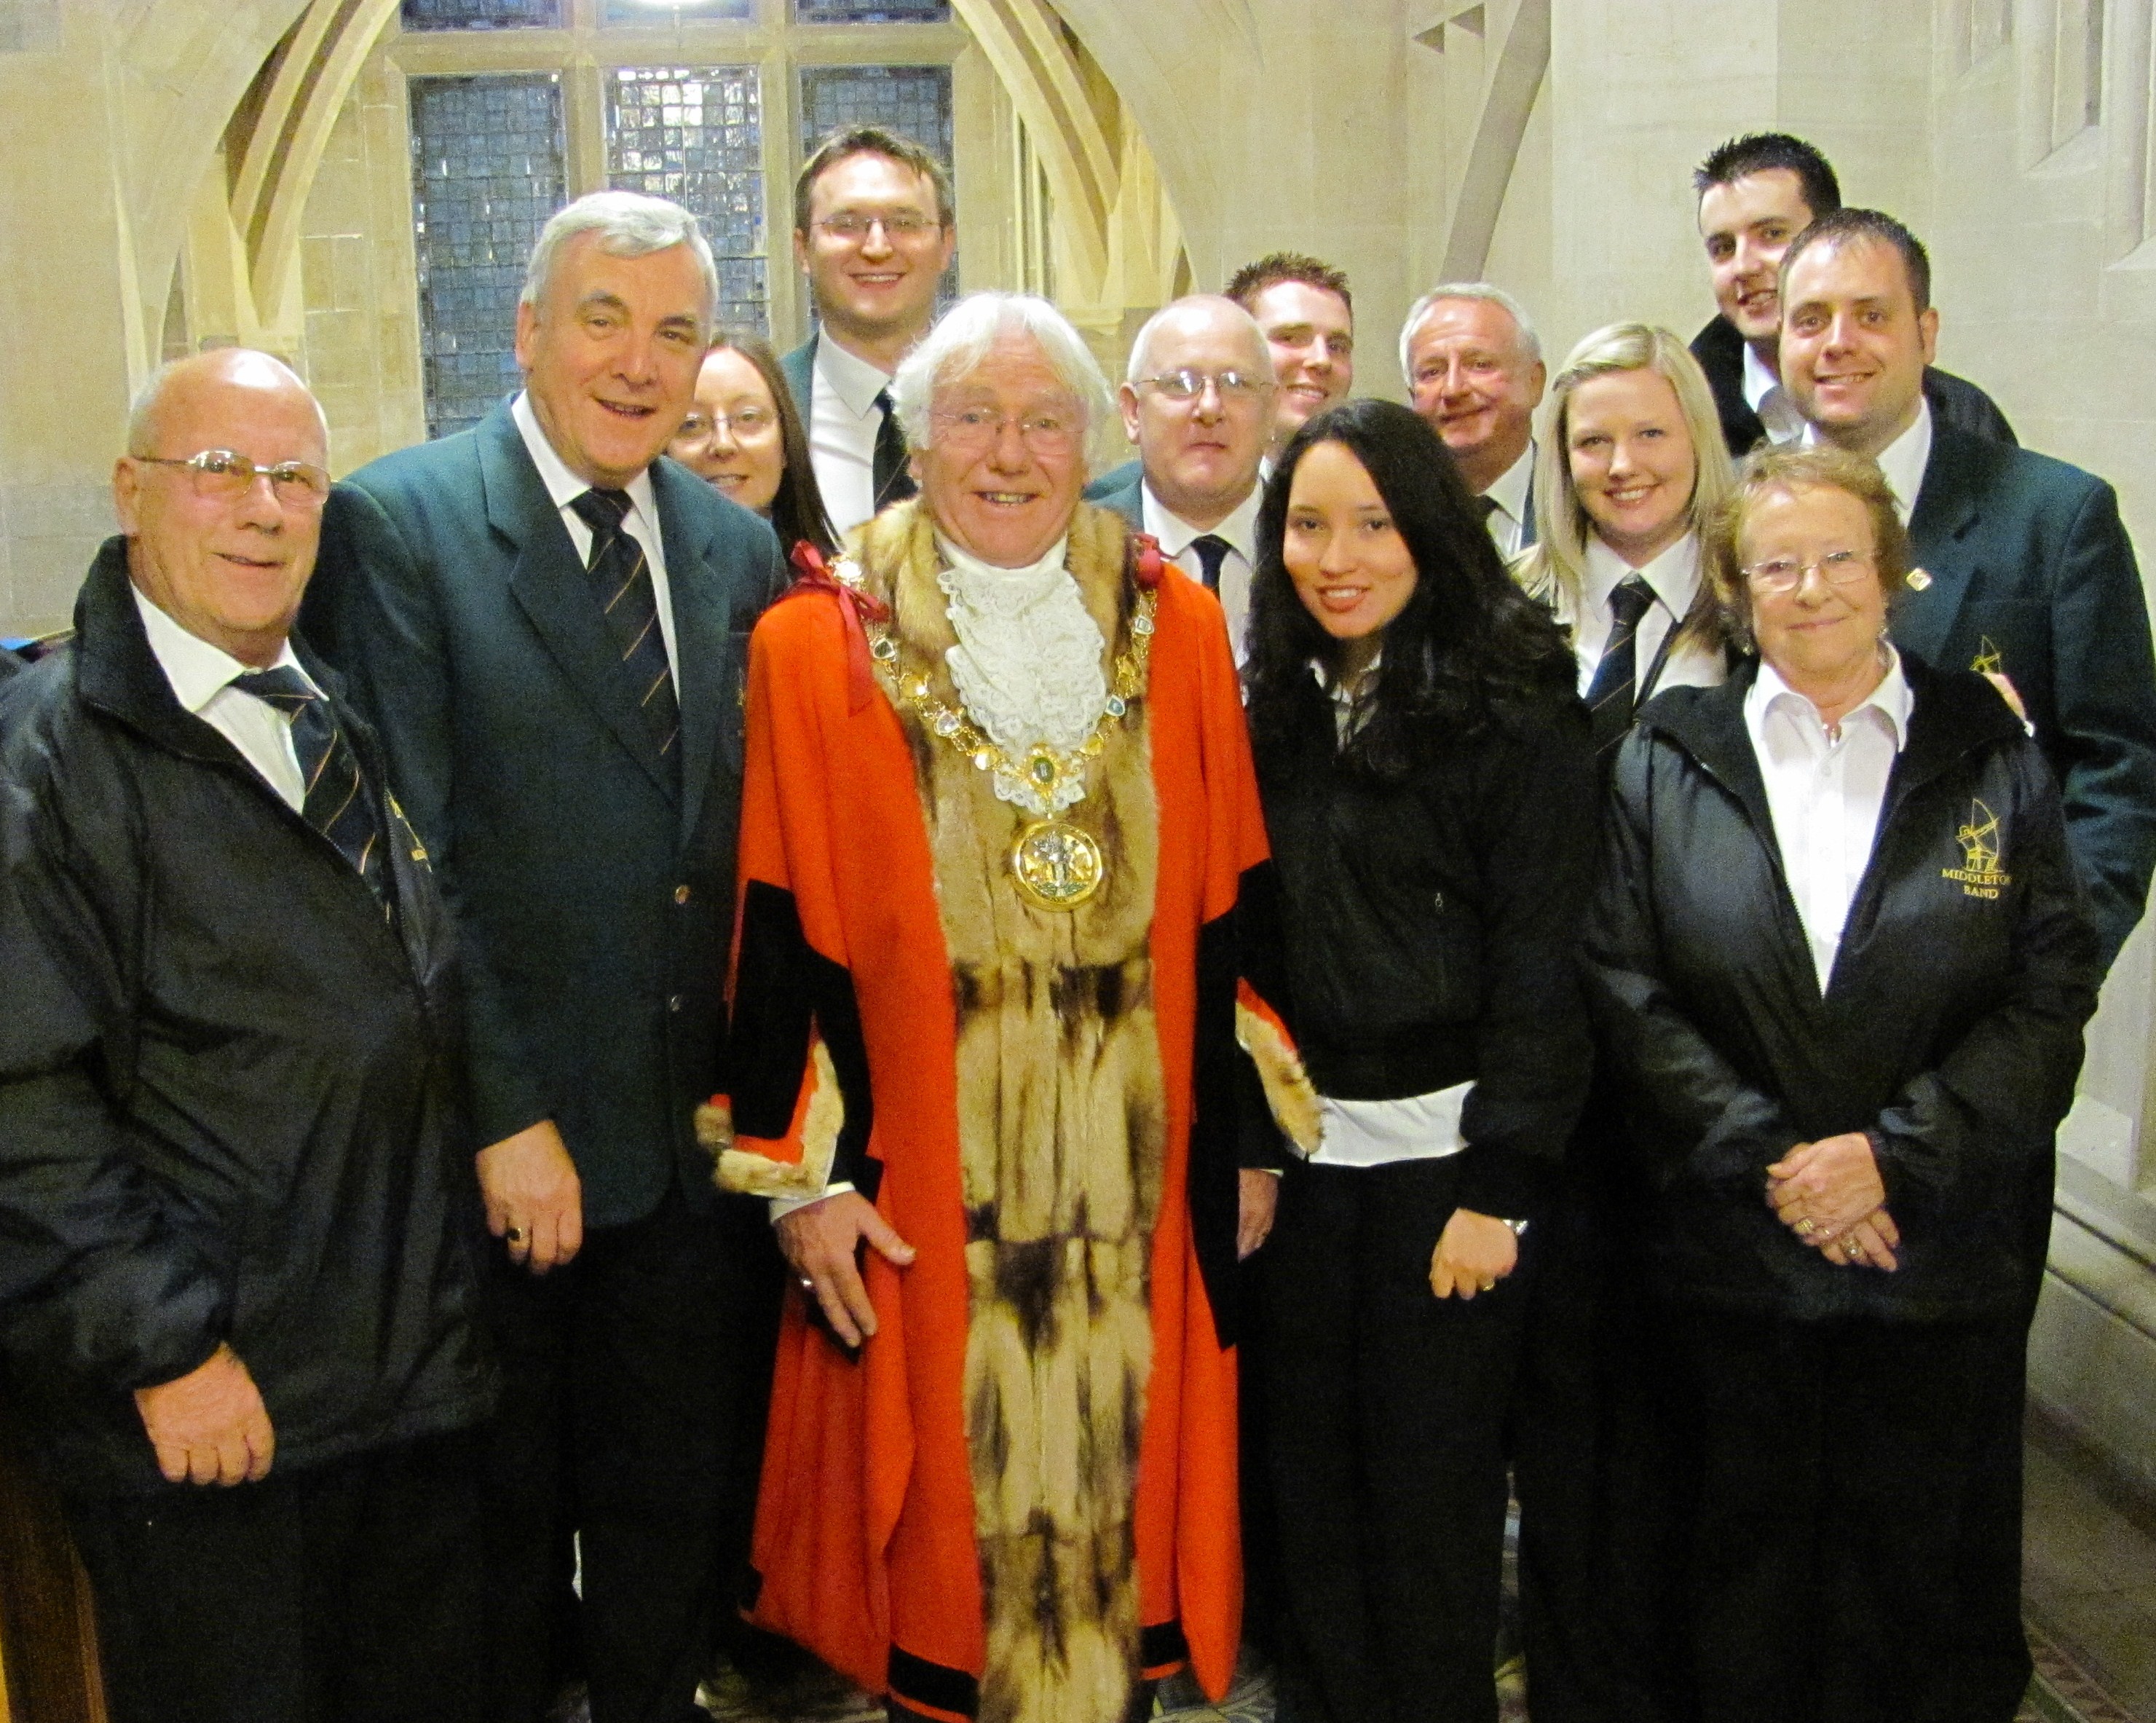 Middleton Band with the Mayor of Rochdale, Alan Godson